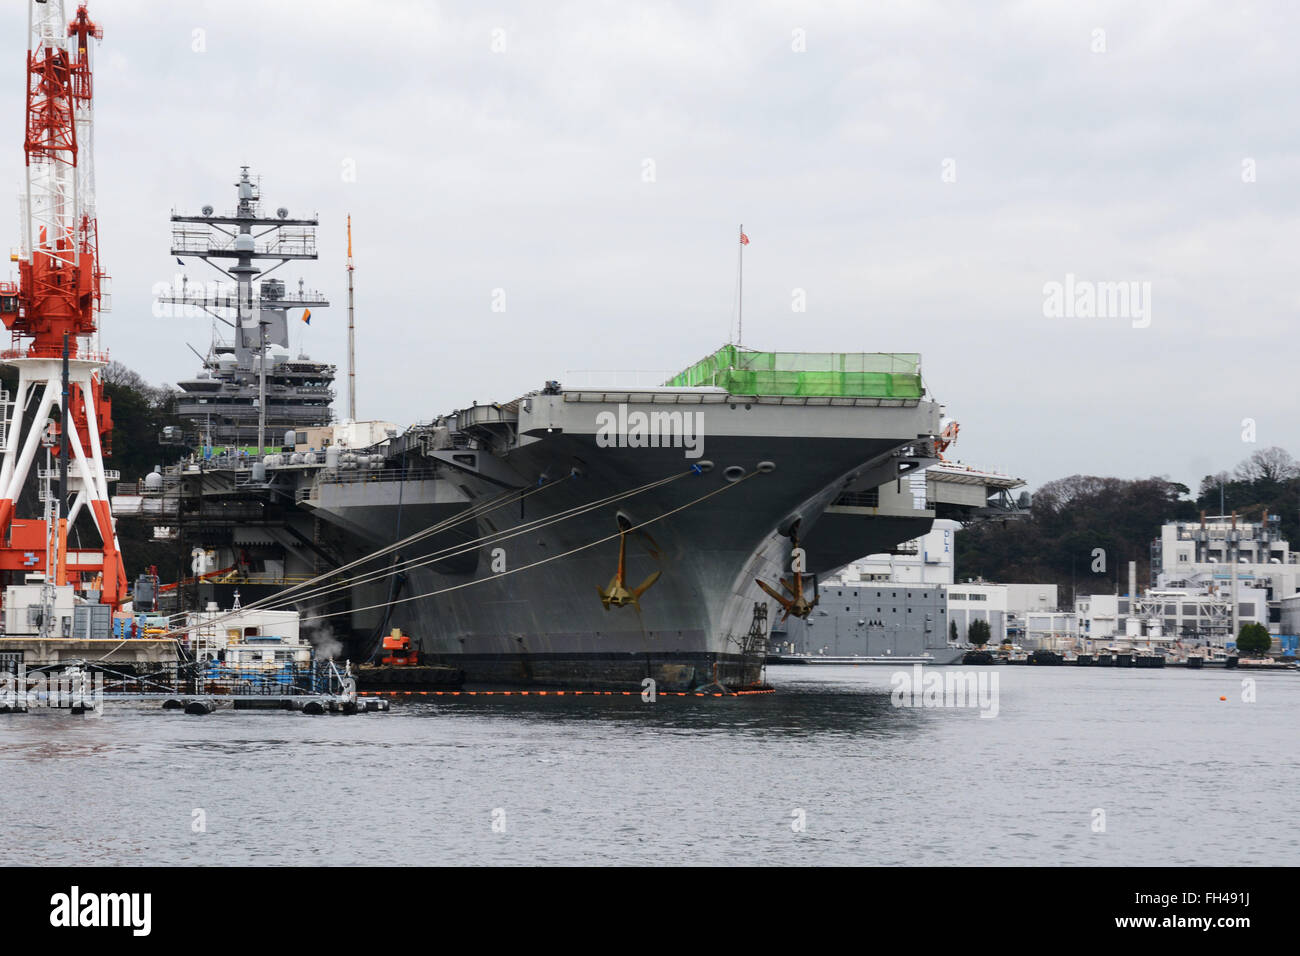 YOKOSUKA, Japan (Feb. 22, 2016) The U.S. Navy’s only forward-deployed aircraft carrier, USS Ronald Reagan (CVN 76), sits pier-side at Fleet Activities (FLEACT) Yokosuka. FLEACT Yokosuka provides, maintains, and operates base facilities and services in support of 7th Fleet's forward-deployed naval forces, 83 tenant commands, and 24,000 military and civilian personnel. Stock Photo